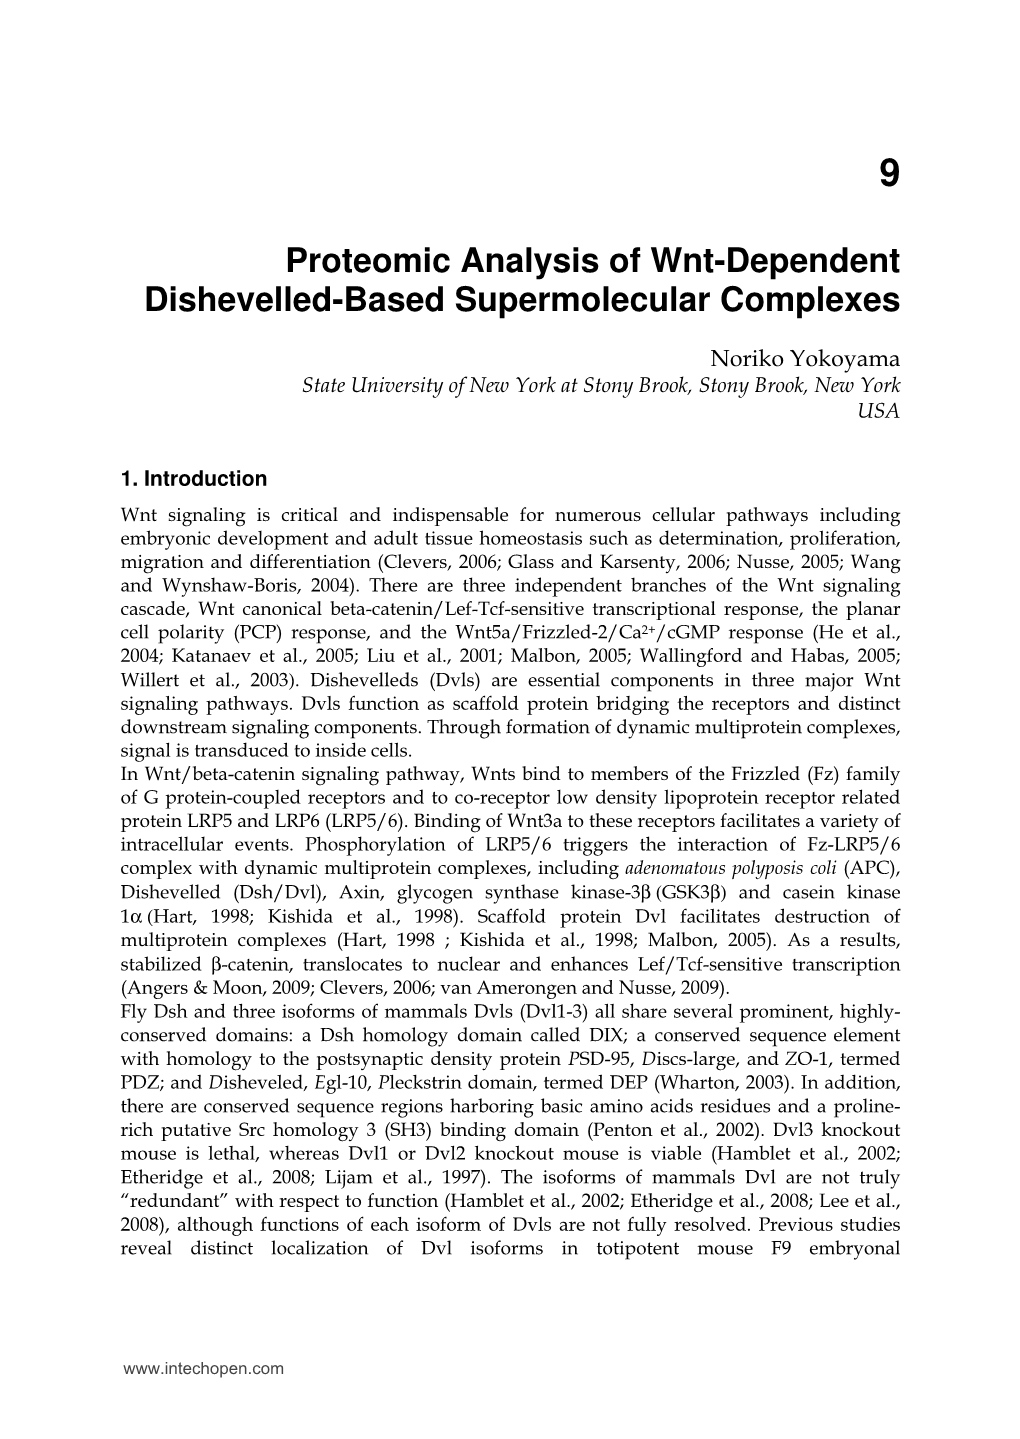 Proteomic Analysis of Wnt-Dependent Dishevelled-Based Supermolecular Complexes